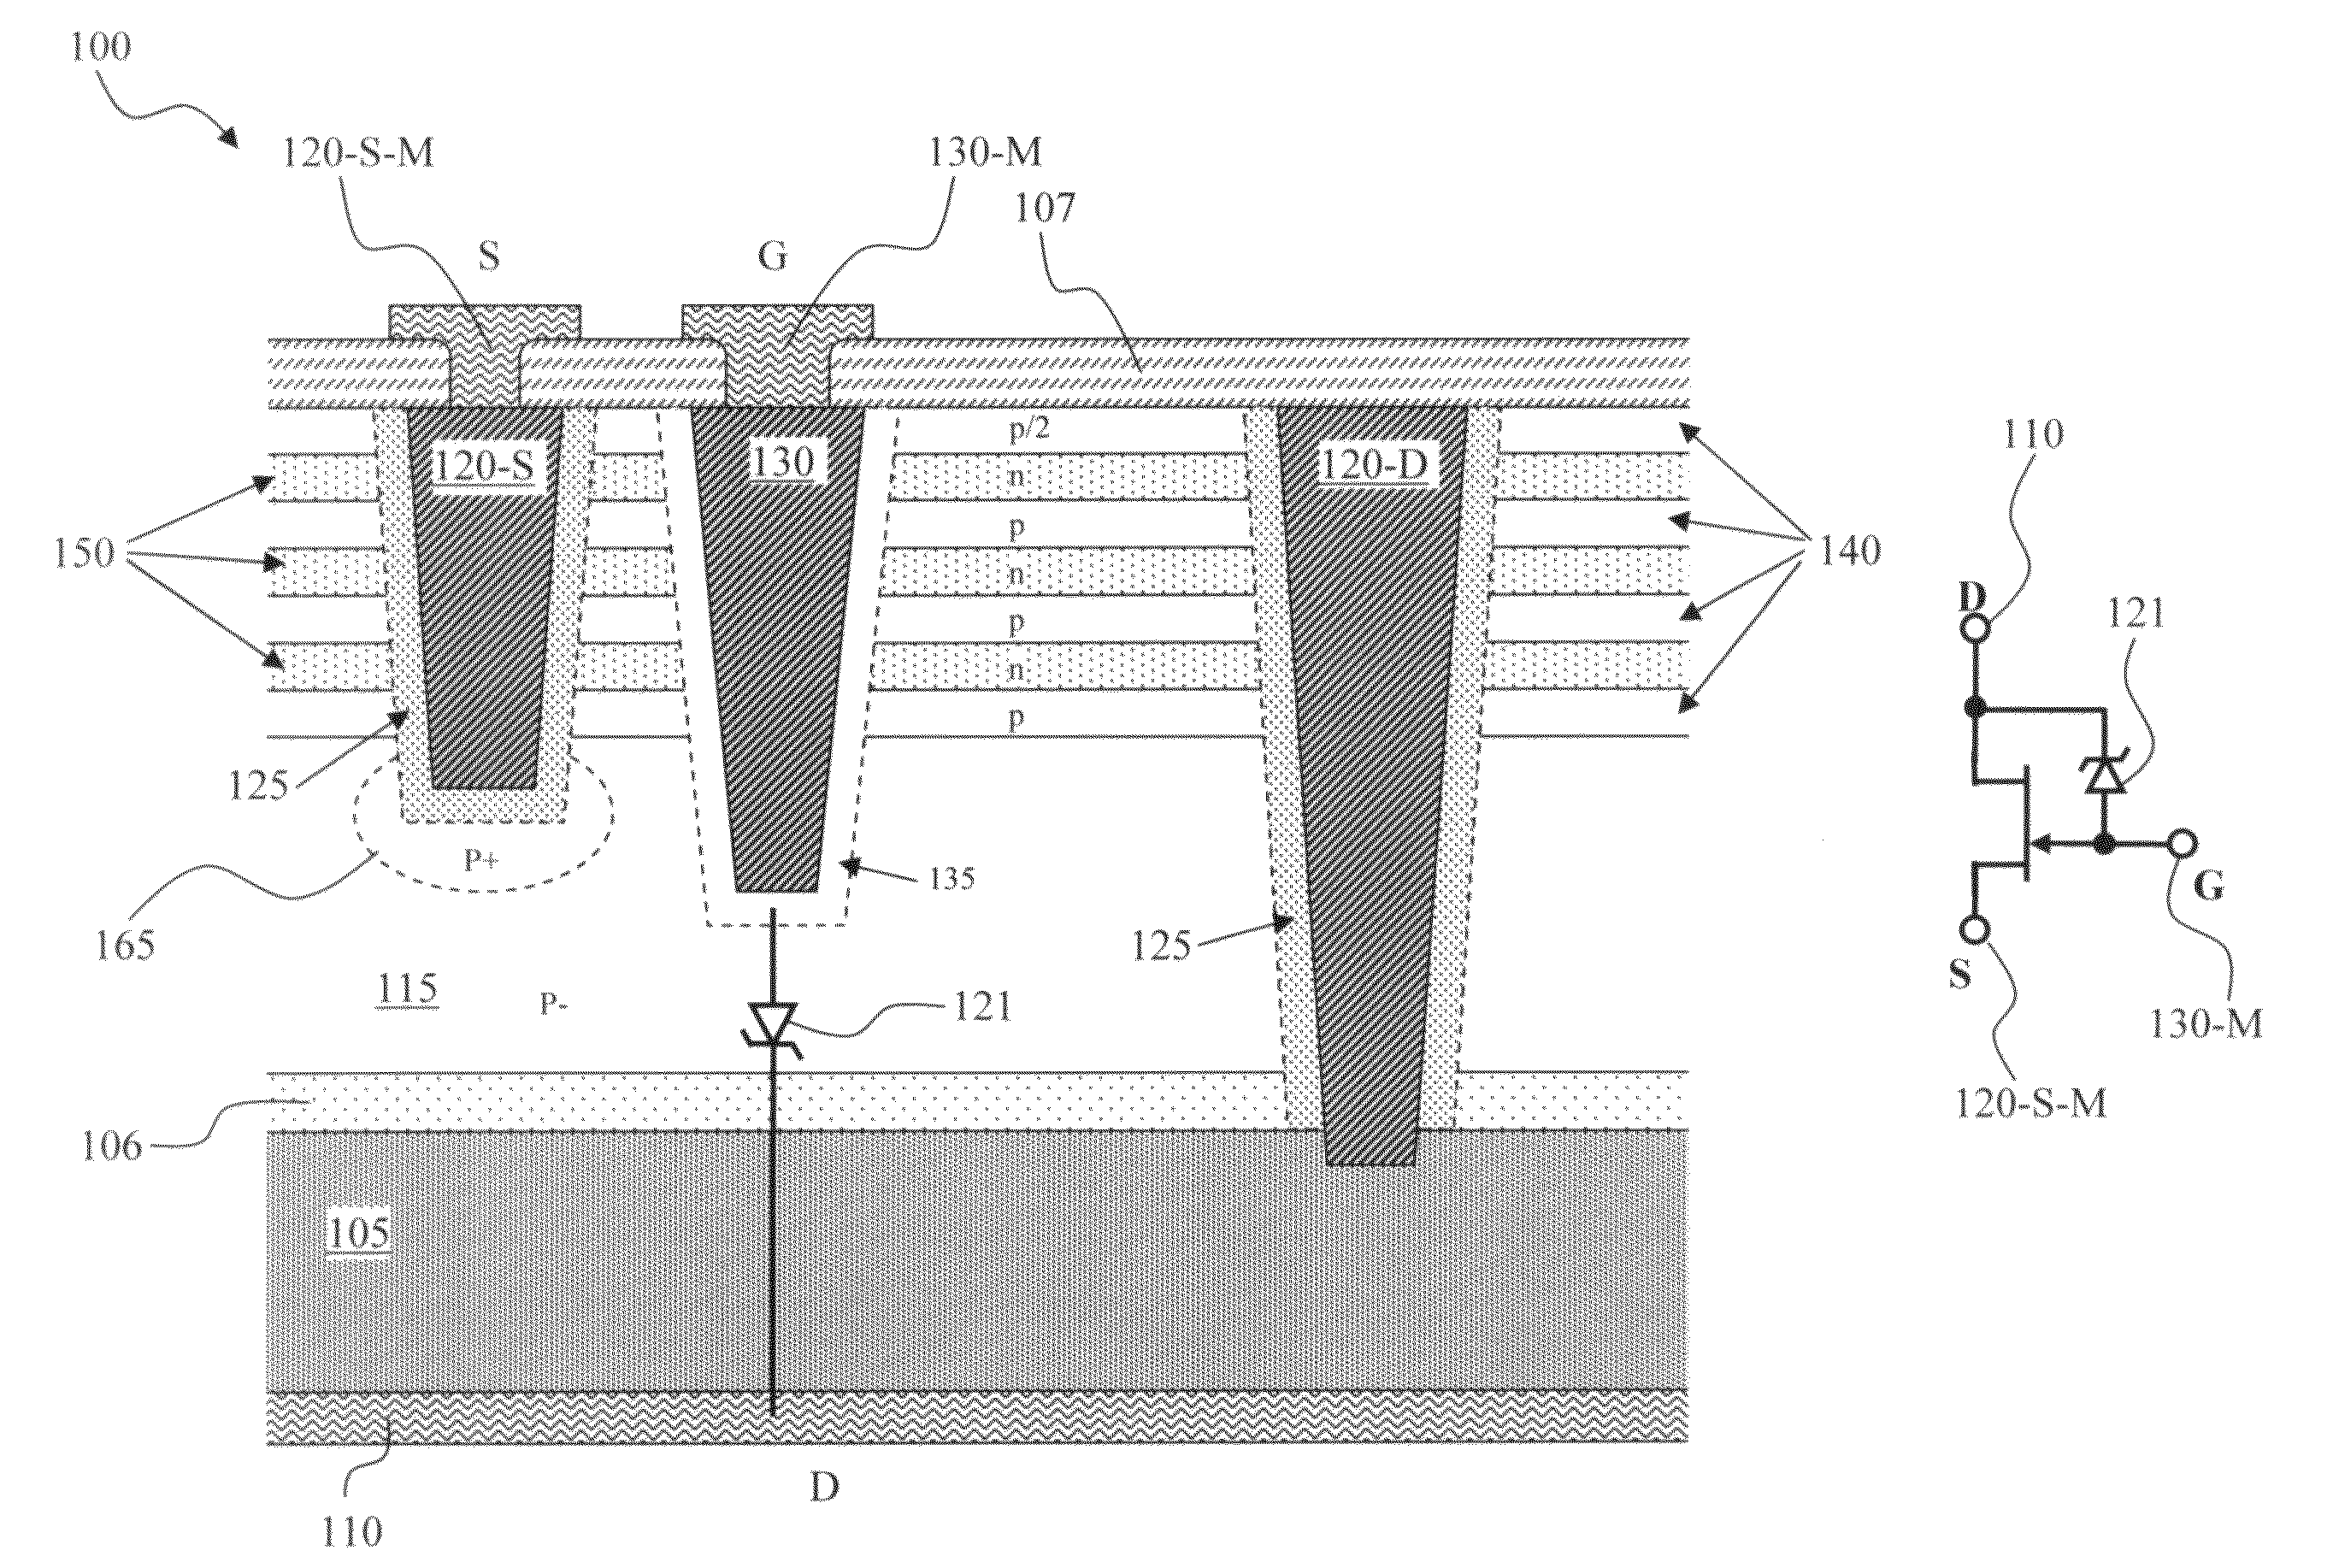 Lateral super junction device with high substrate-gate breakdown and built-in avalanche clamp diode